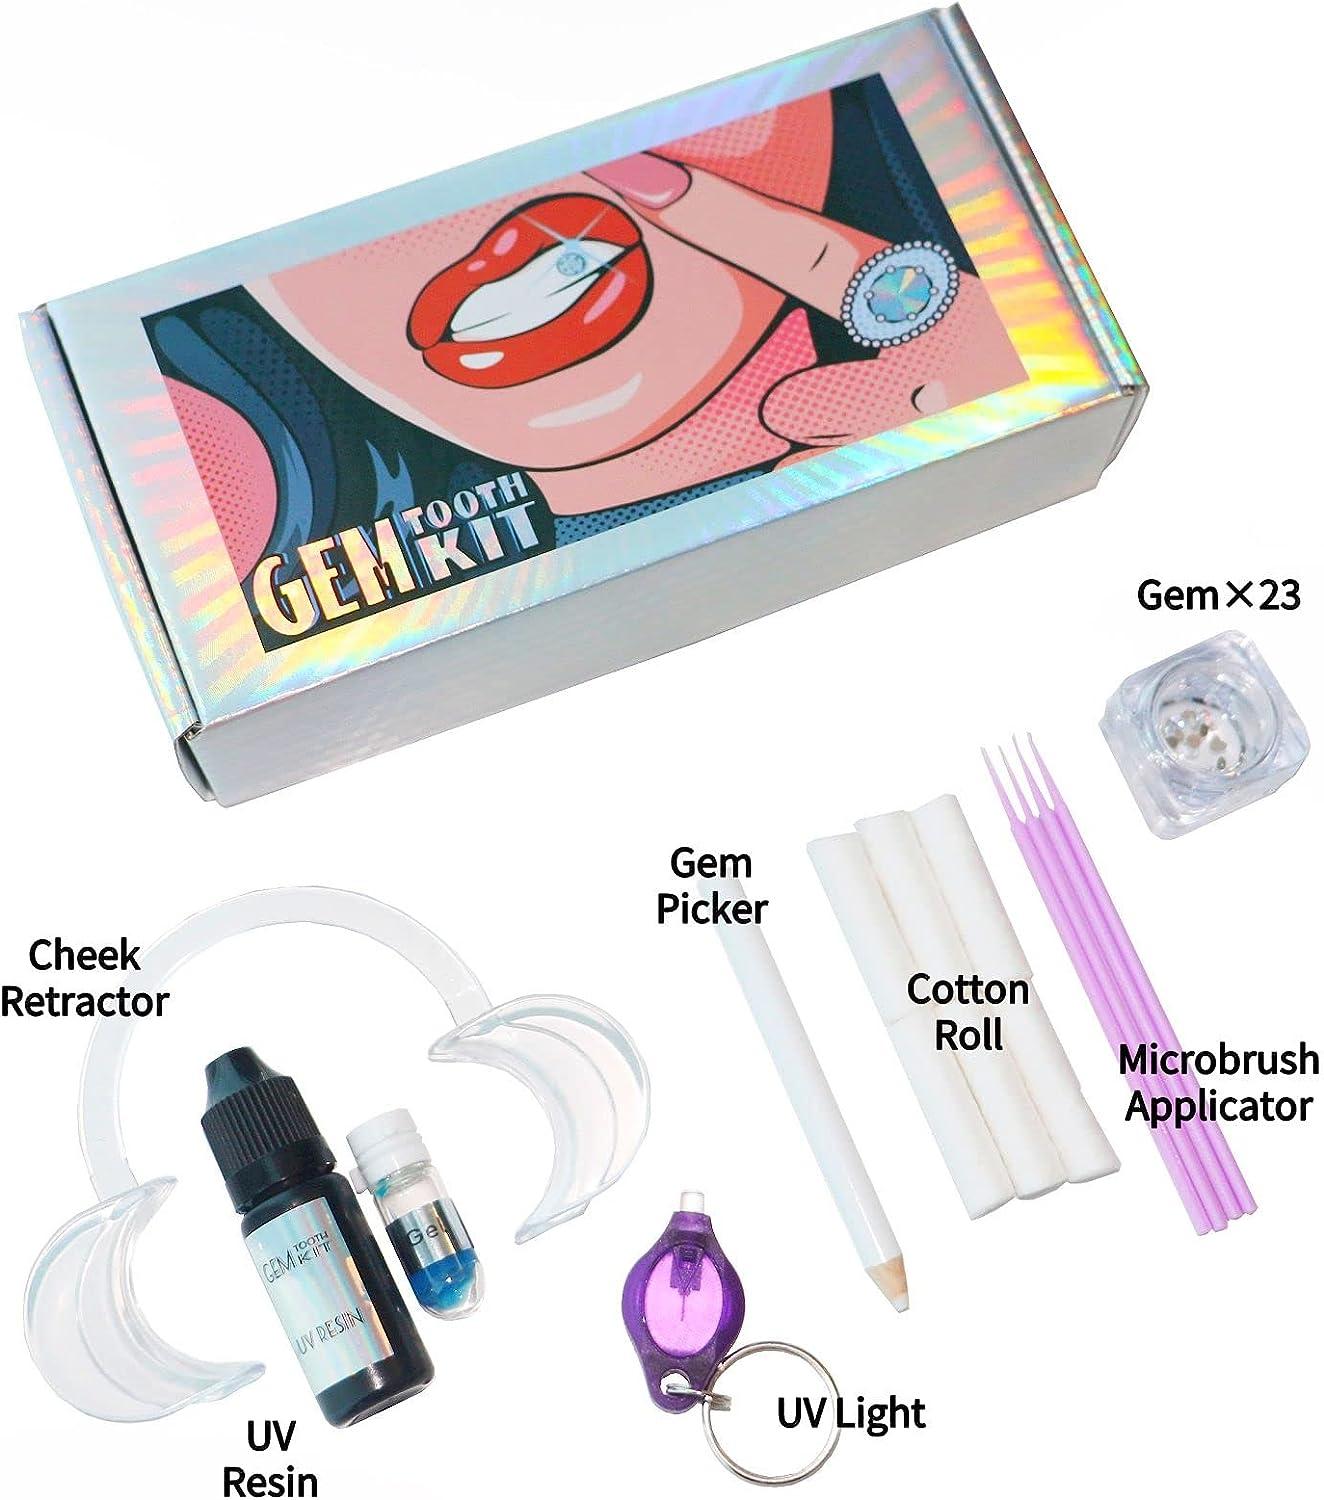  Tooth Gem Kit - Professional Tooth Gem Kit - Bundle Set with  Glue kit, Cheek retractor, Dental cotton Roll - Microbrush - Teeth Jewelry  - USA (PRO - BUNDLE SET) : Beauty & Personal Care